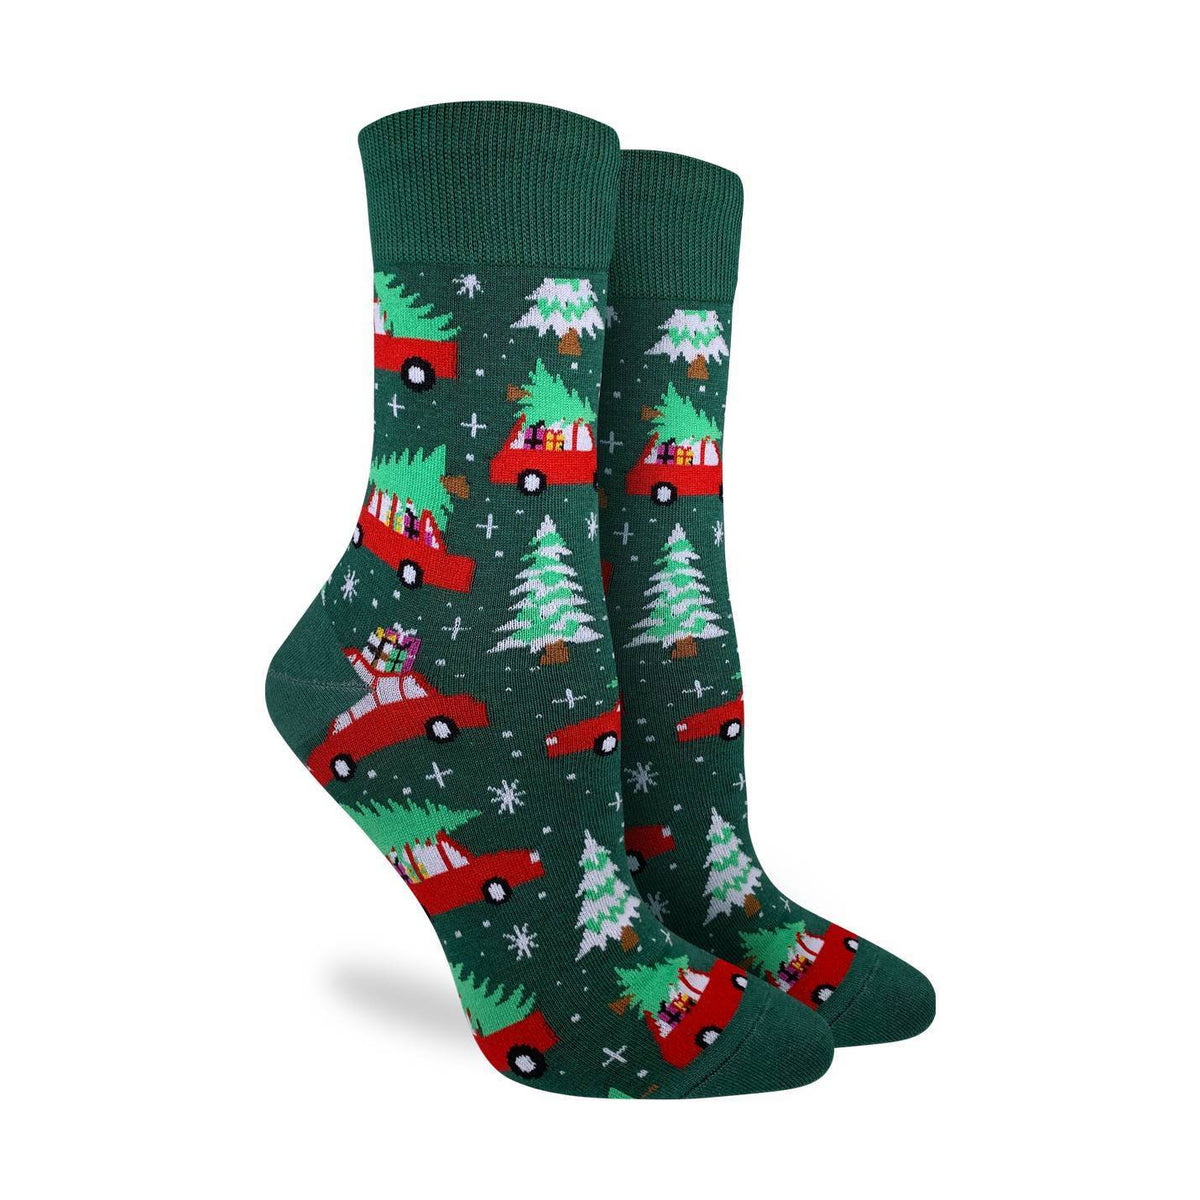 Good Luck Sock Christmas Trees women&#39;s green sock with red cars and trucks with presents on display feet